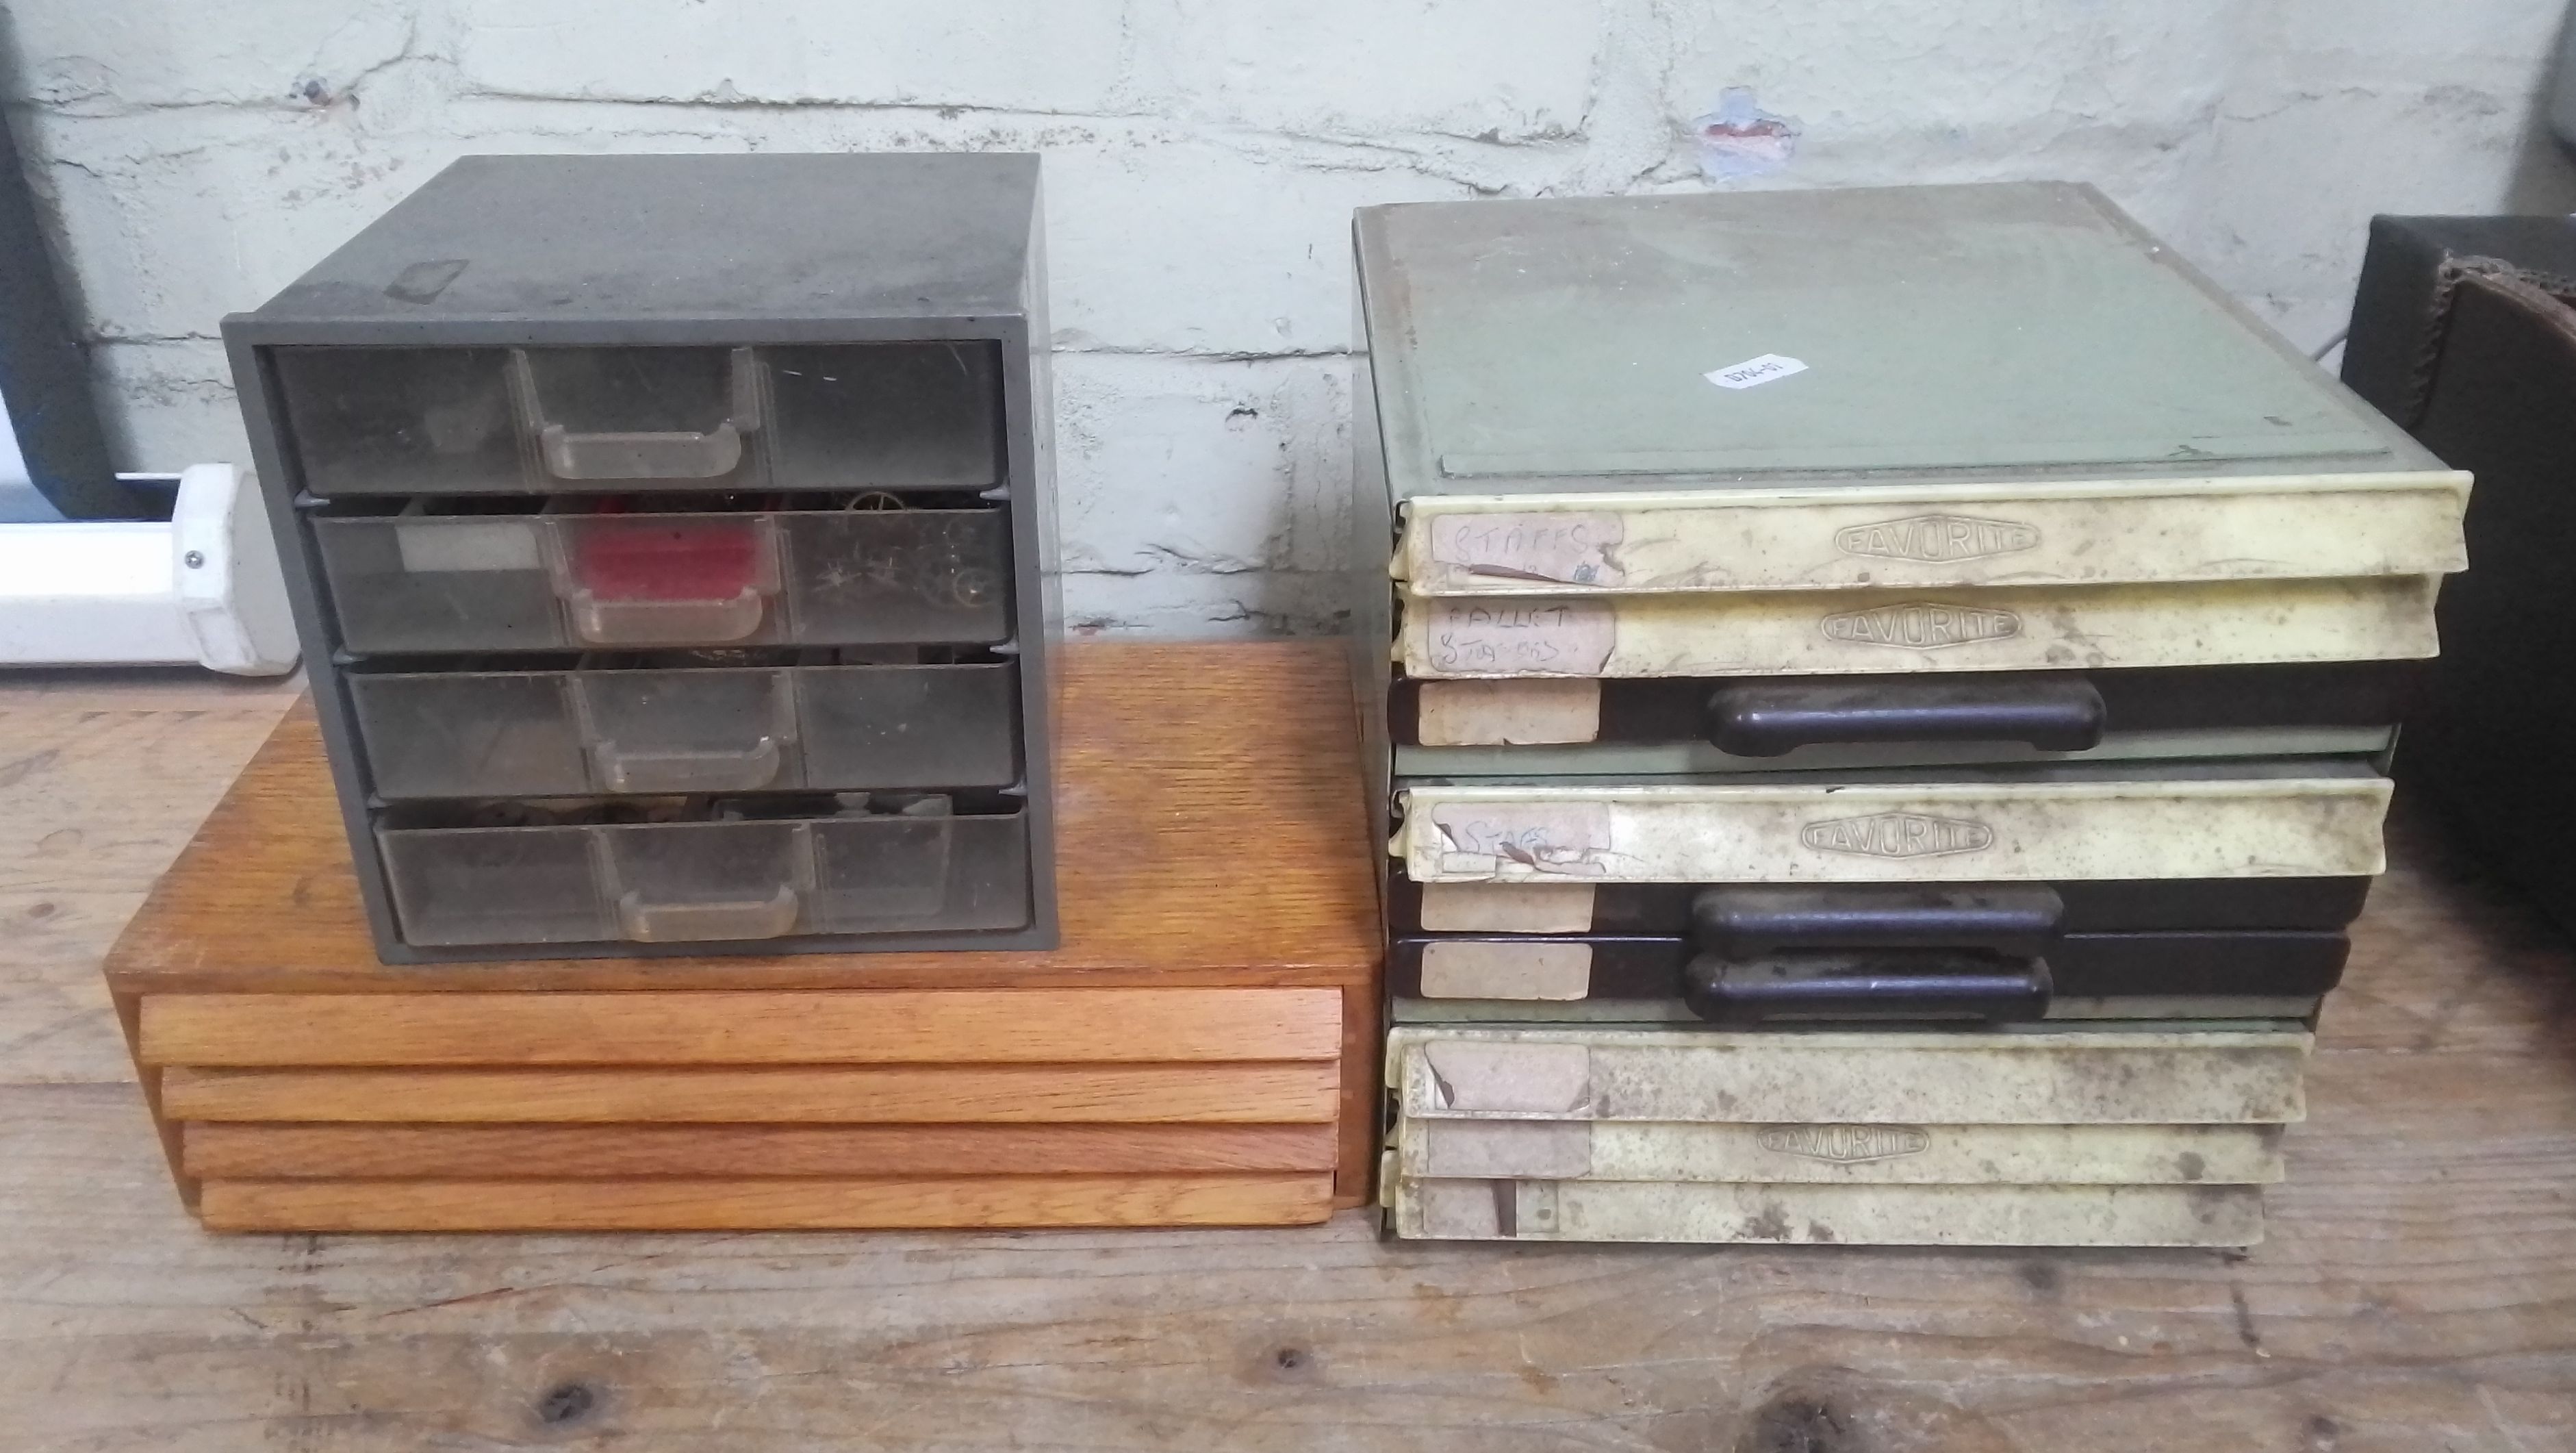 Wooden, plastic and metal cabinets of watch spares.